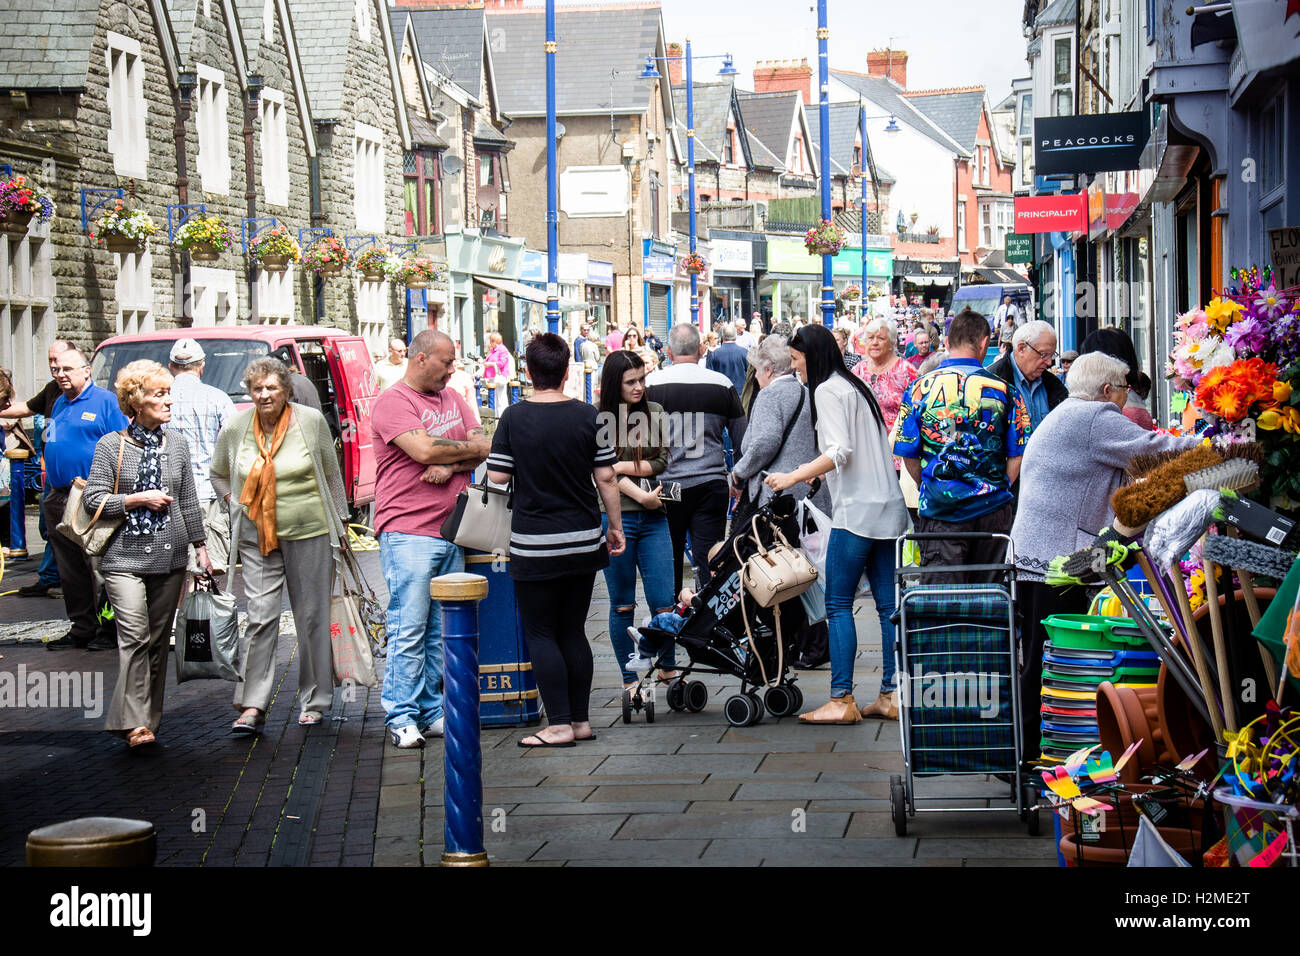 Photograph of Porthcawl town in South Wales. Taken during the summer time with lots of tourists enjoying the sun. Stock Photo